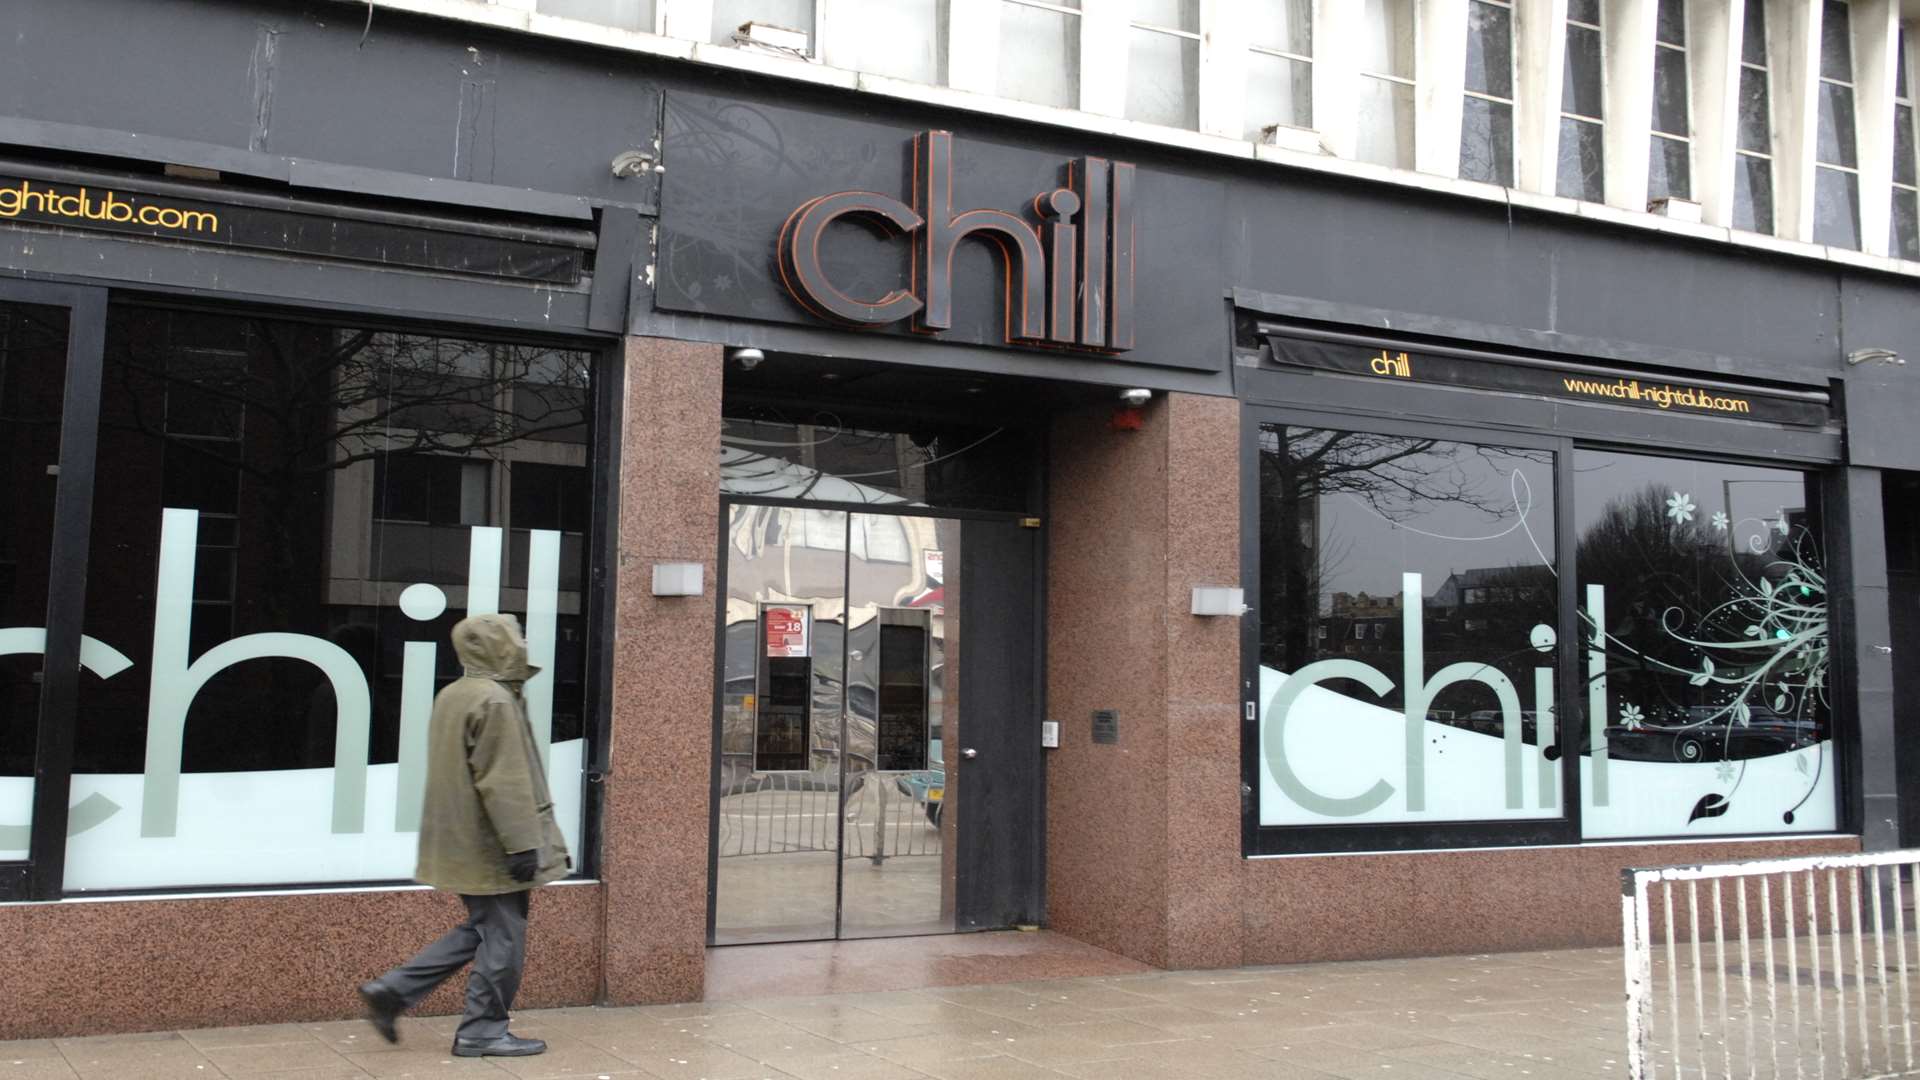 Chill nightclub in St George's Place